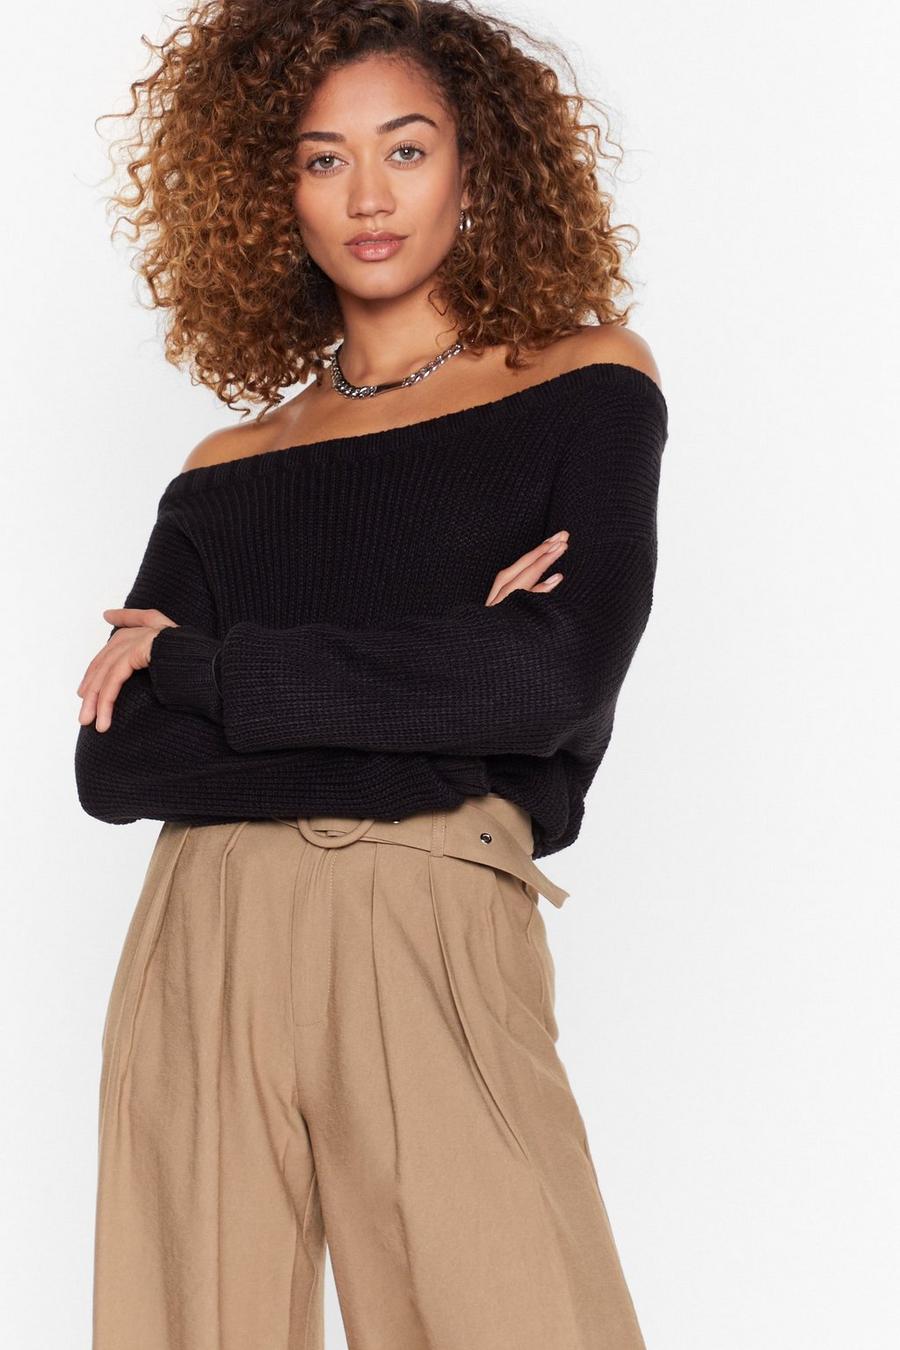 Knit's My Way Off-the-Shoulder Sweater